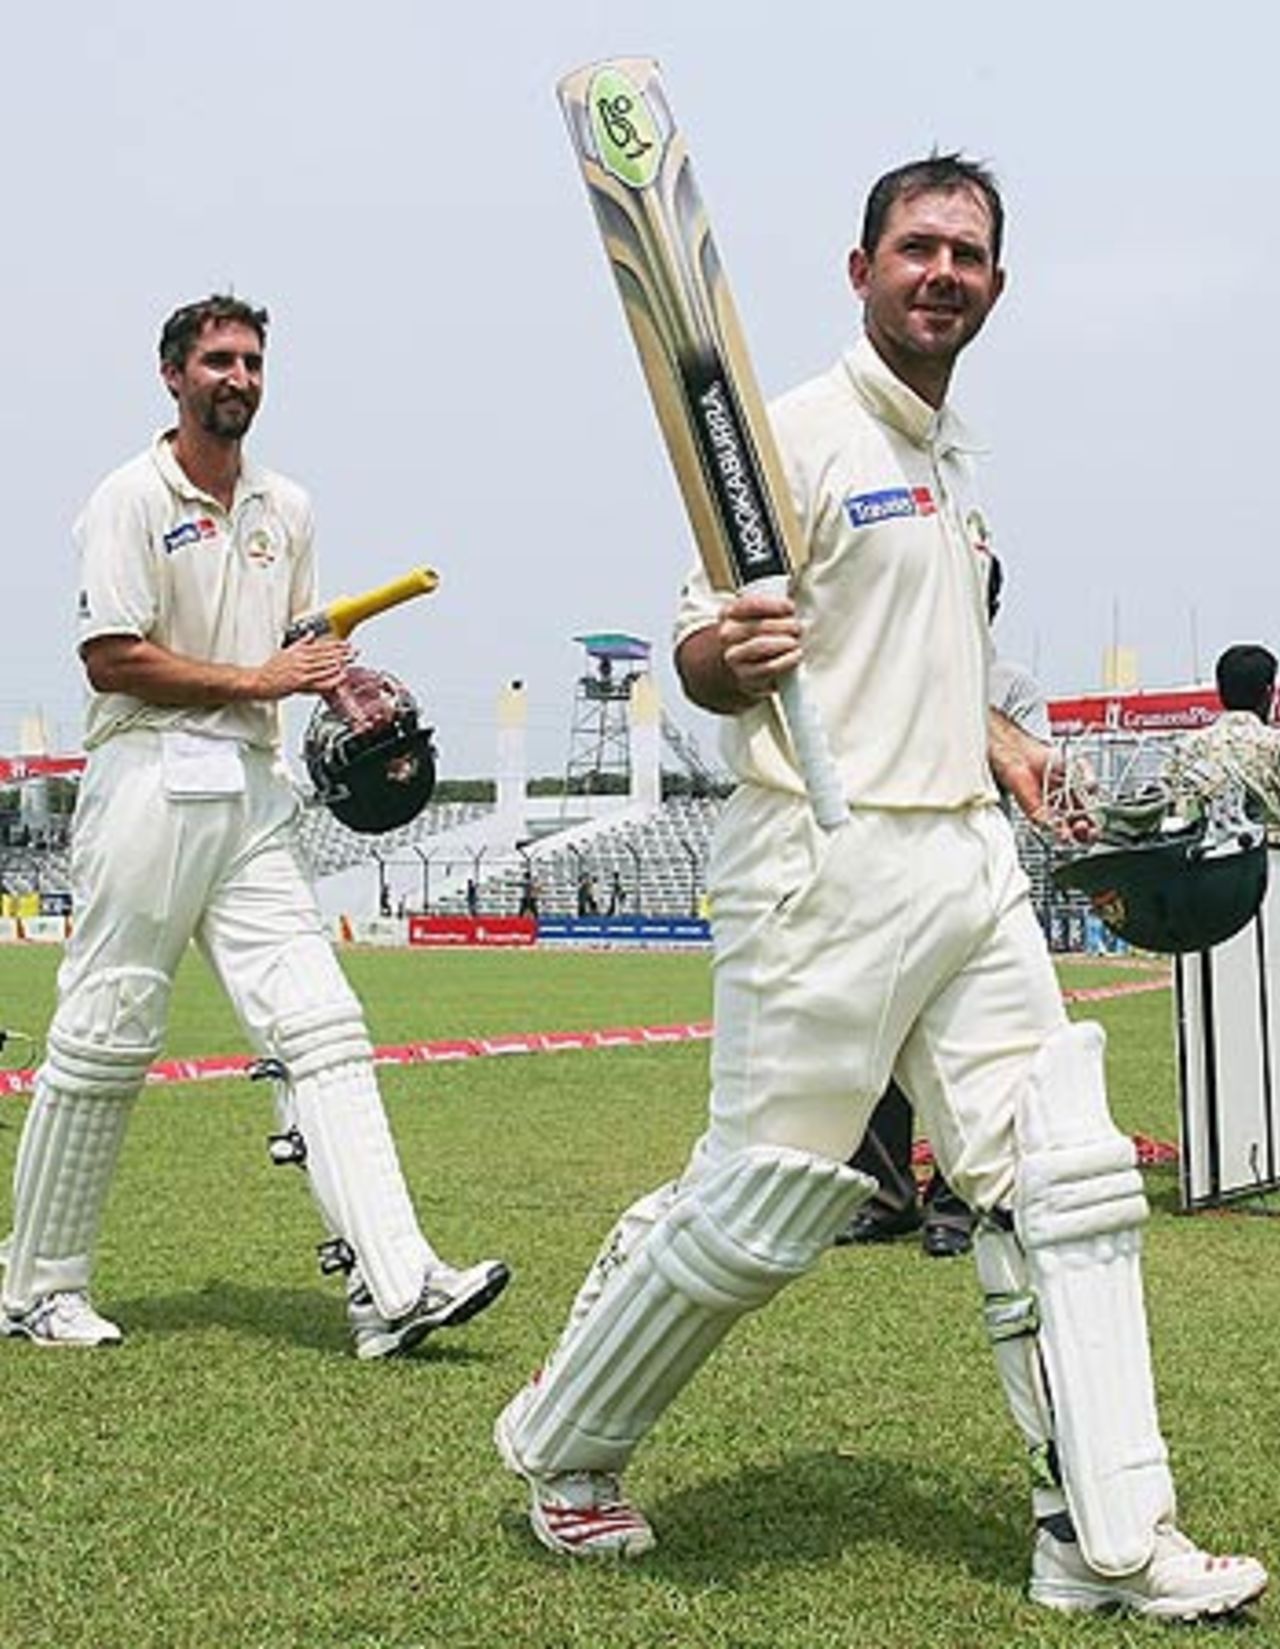 Ricky Ponting and Jason Gillespie troop off after the victory, Bangladesh v Australia, 1st Test, Fatullah, 5th day, April 13, 2006